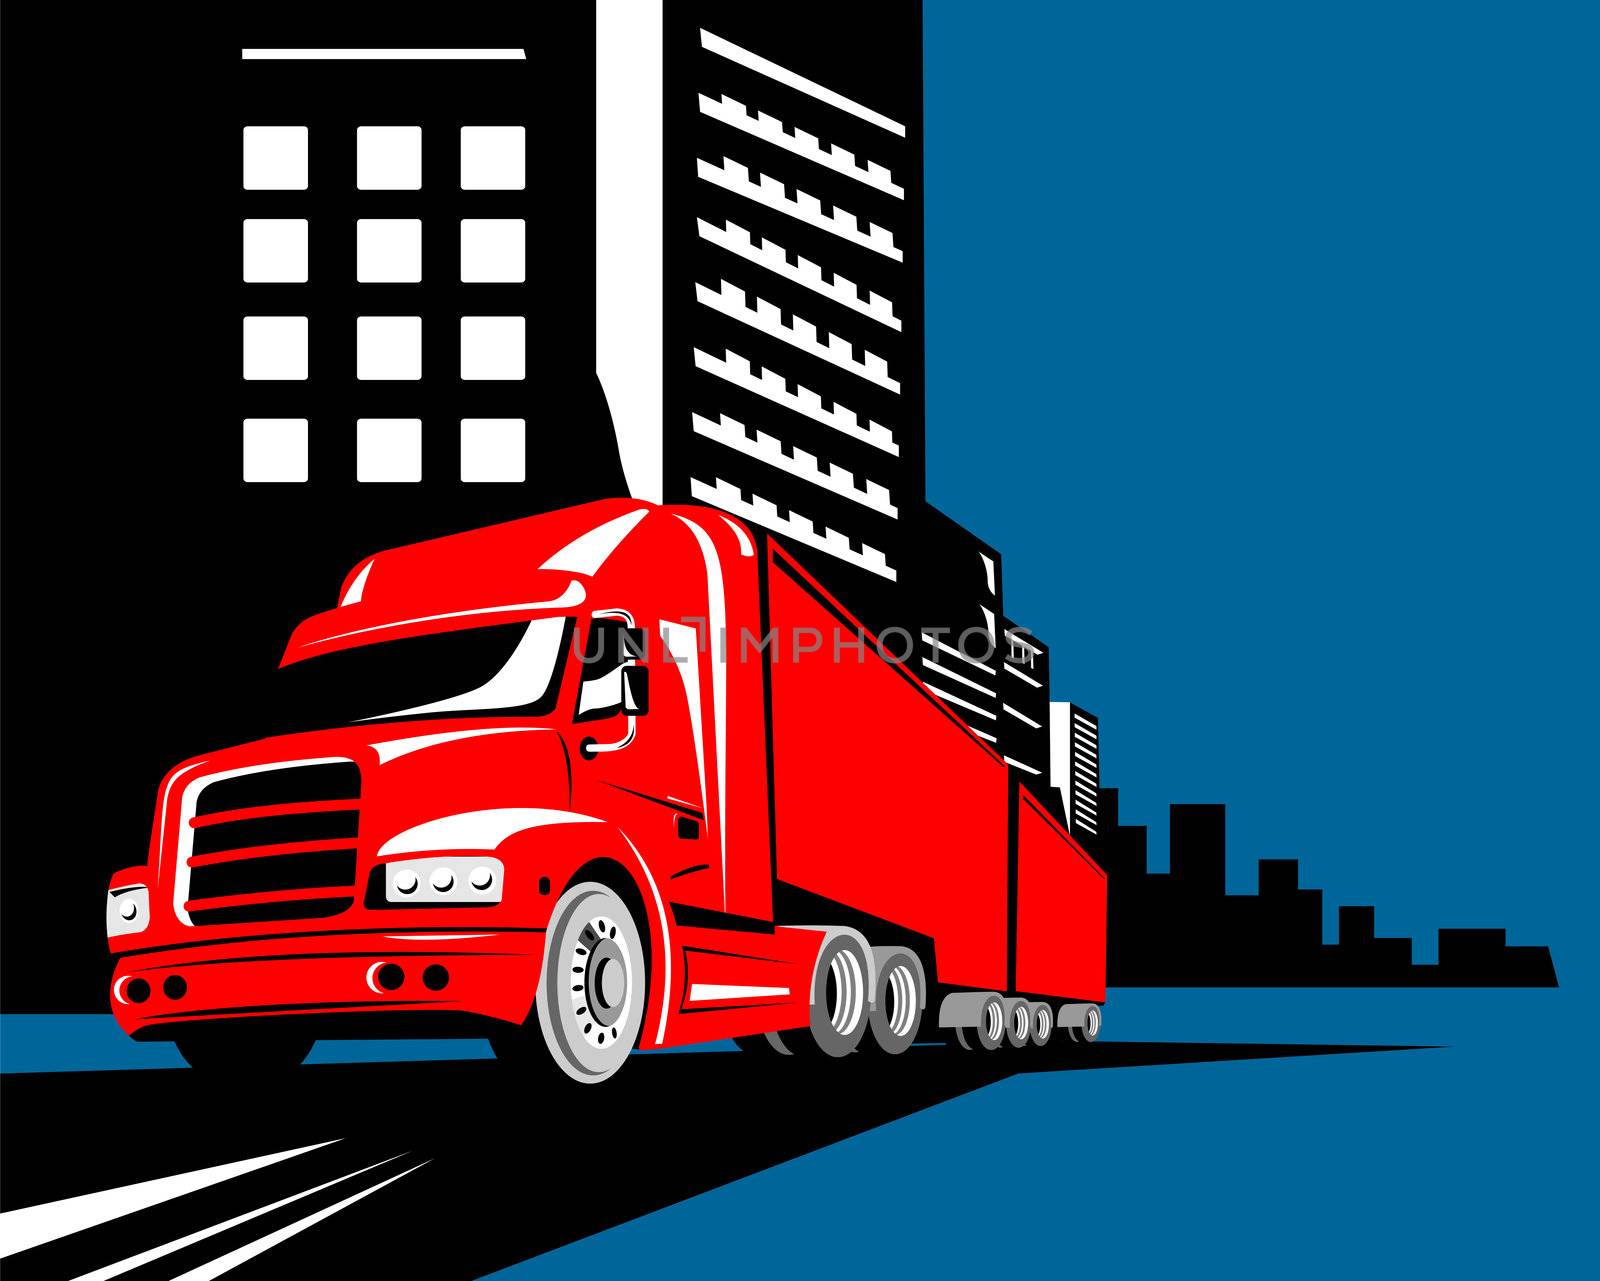 illustration of a container truck lorry done in retro stylewith buildings in background